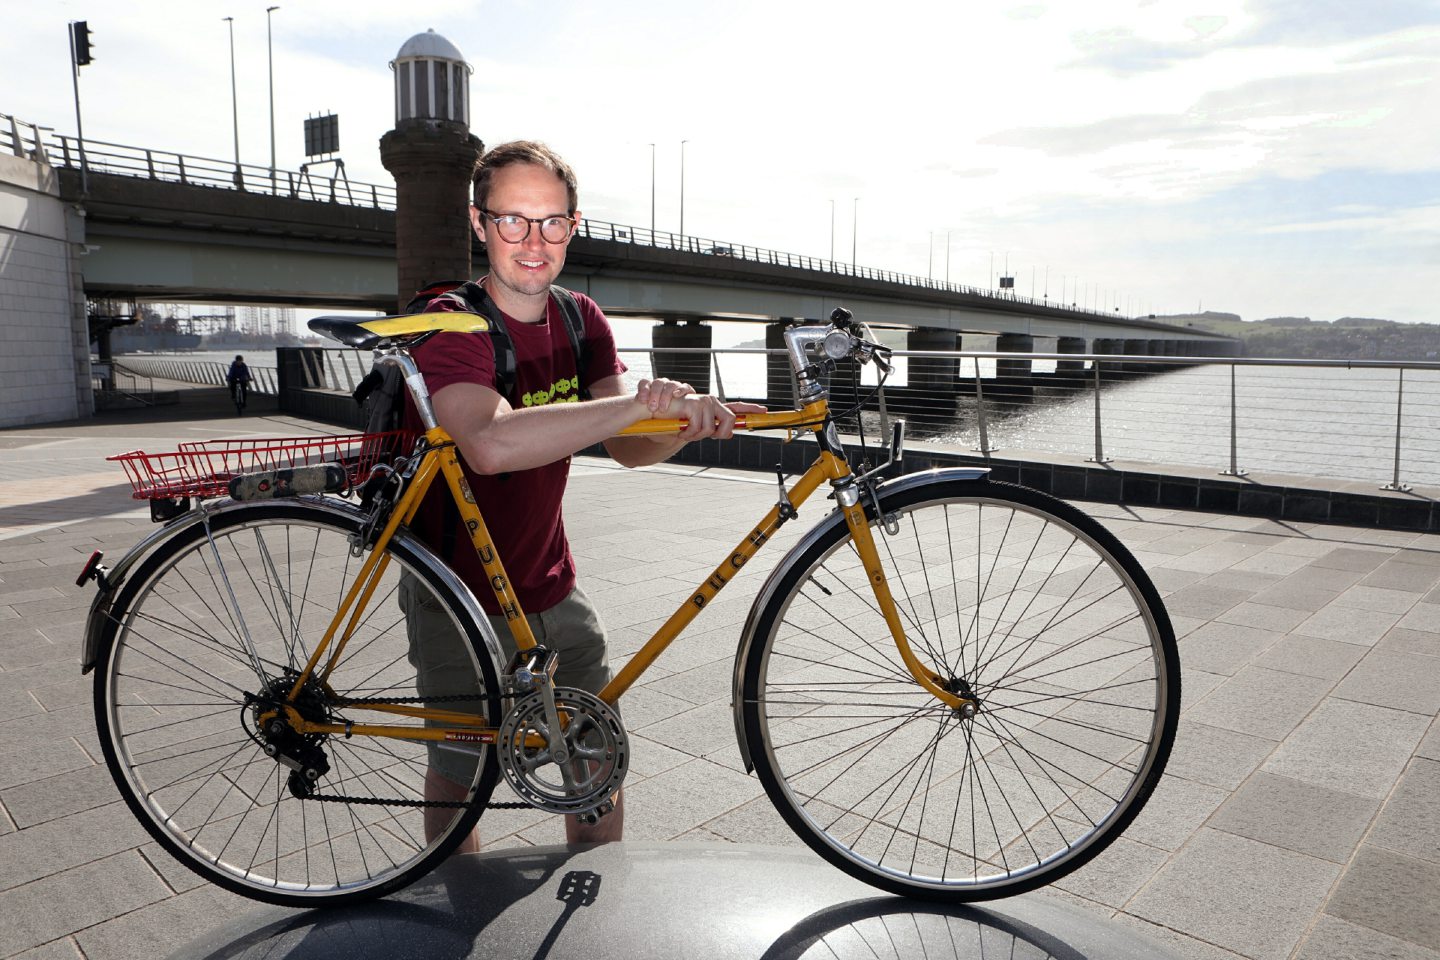 Courier Dundee news CR0021529 G Jennings pics coronavirus covid-19, Russell Pepper of Dundee Cycling Forum campaigning for walking and cycling on one carraige of the Tay road bridge, wednesday 27th May.